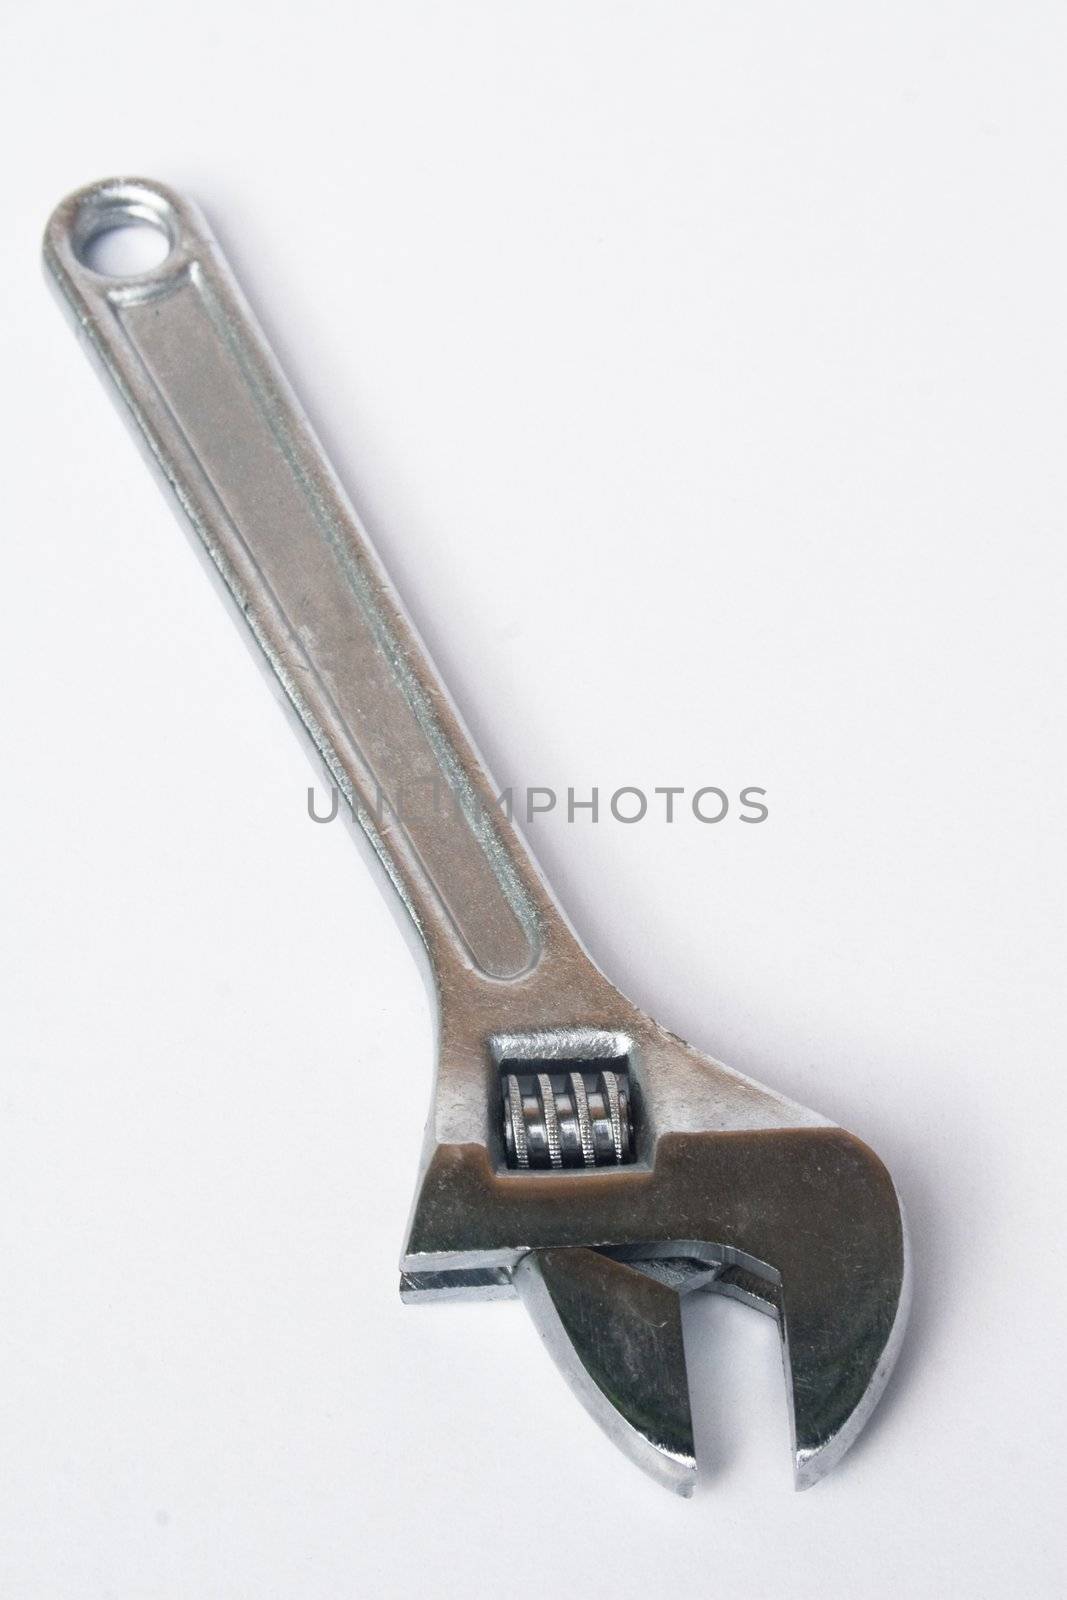 Crescent wrench by timscottrom